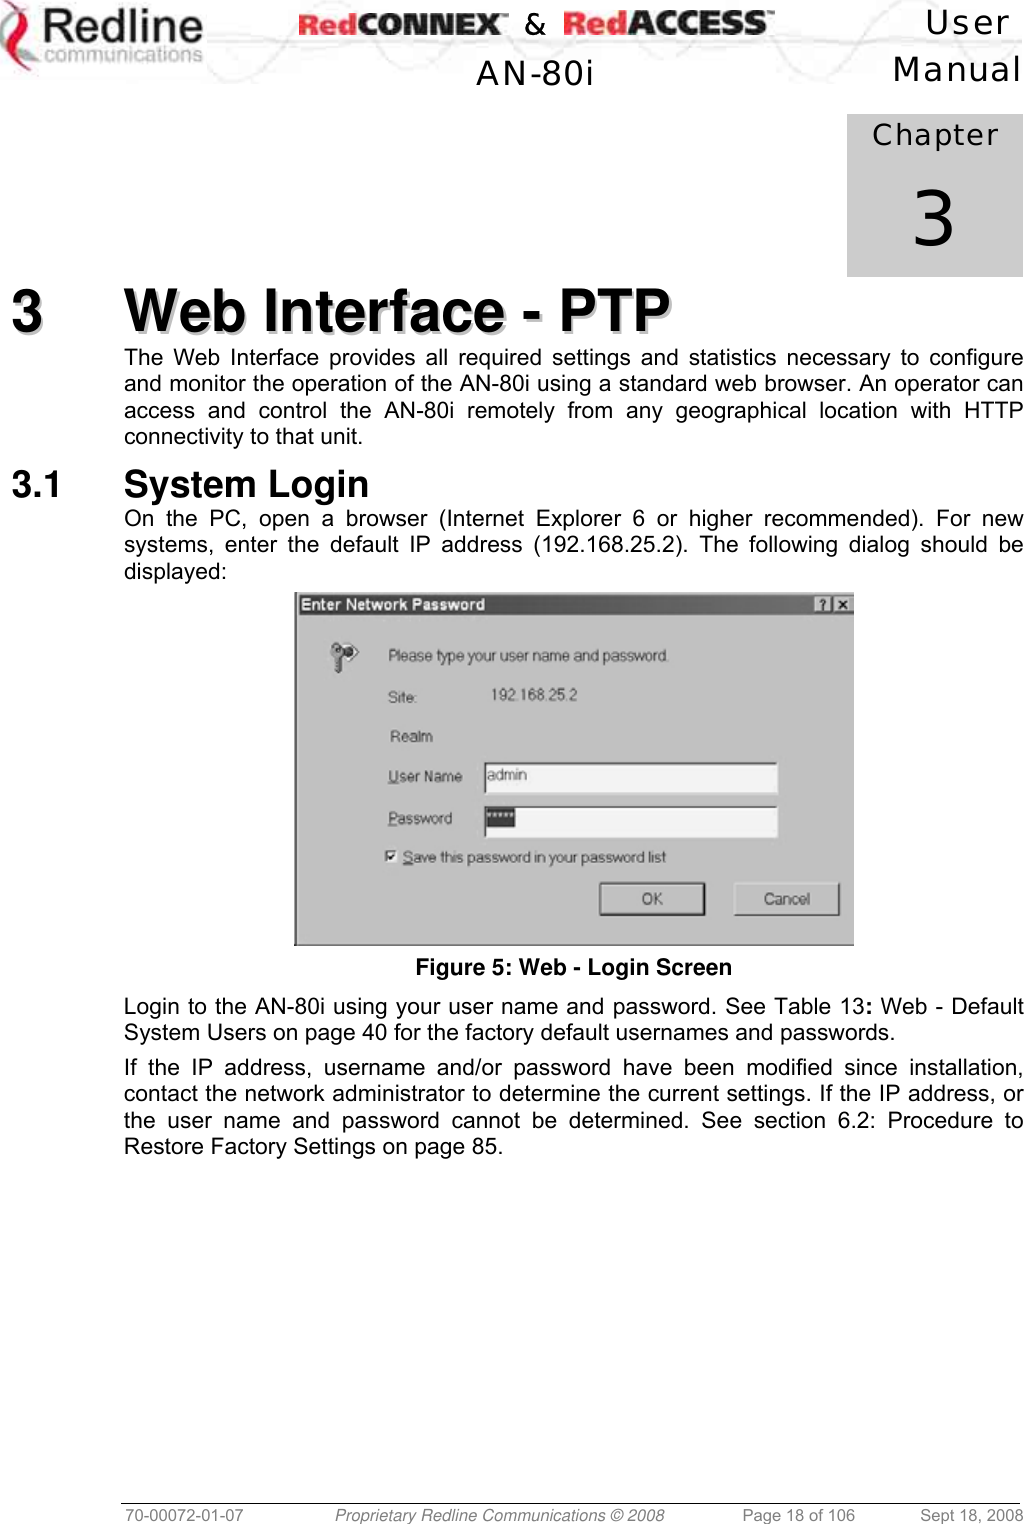    &amp;  User  AN-80i Manual  70-00072-01-07  Proprietary Redline Communications © 2008  Page 18 of 106  Sept 18, 2008            Chapter 3 33  WWeebb  IInntteerrffaaccee  --  PPTTPP  The Web Interface provides all required settings and statistics necessary to configure and monitor the operation of the AN-80i using a standard web browser. An operator can access and control the AN-80i remotely from any geographical location with HTTP connectivity to that unit. 3.1 System Login On the PC, open a browser (Internet Explorer 6 or higher recommended). For new systems, enter the default IP address (192.168.25.2). The following dialog should be displayed:  Figure 5: Web - Login Screen Login to the AN-80i using your user name and password. See Table 13: Web - Default System Users on page 40 for the factory default usernames and passwords. If the IP address, username and/or password have been modified since installation, contact the network administrator to determine the current settings. If the IP address, or the user name and password cannot be determined. See section 6.2: Procedure to Restore Factory Settings on page 85. 